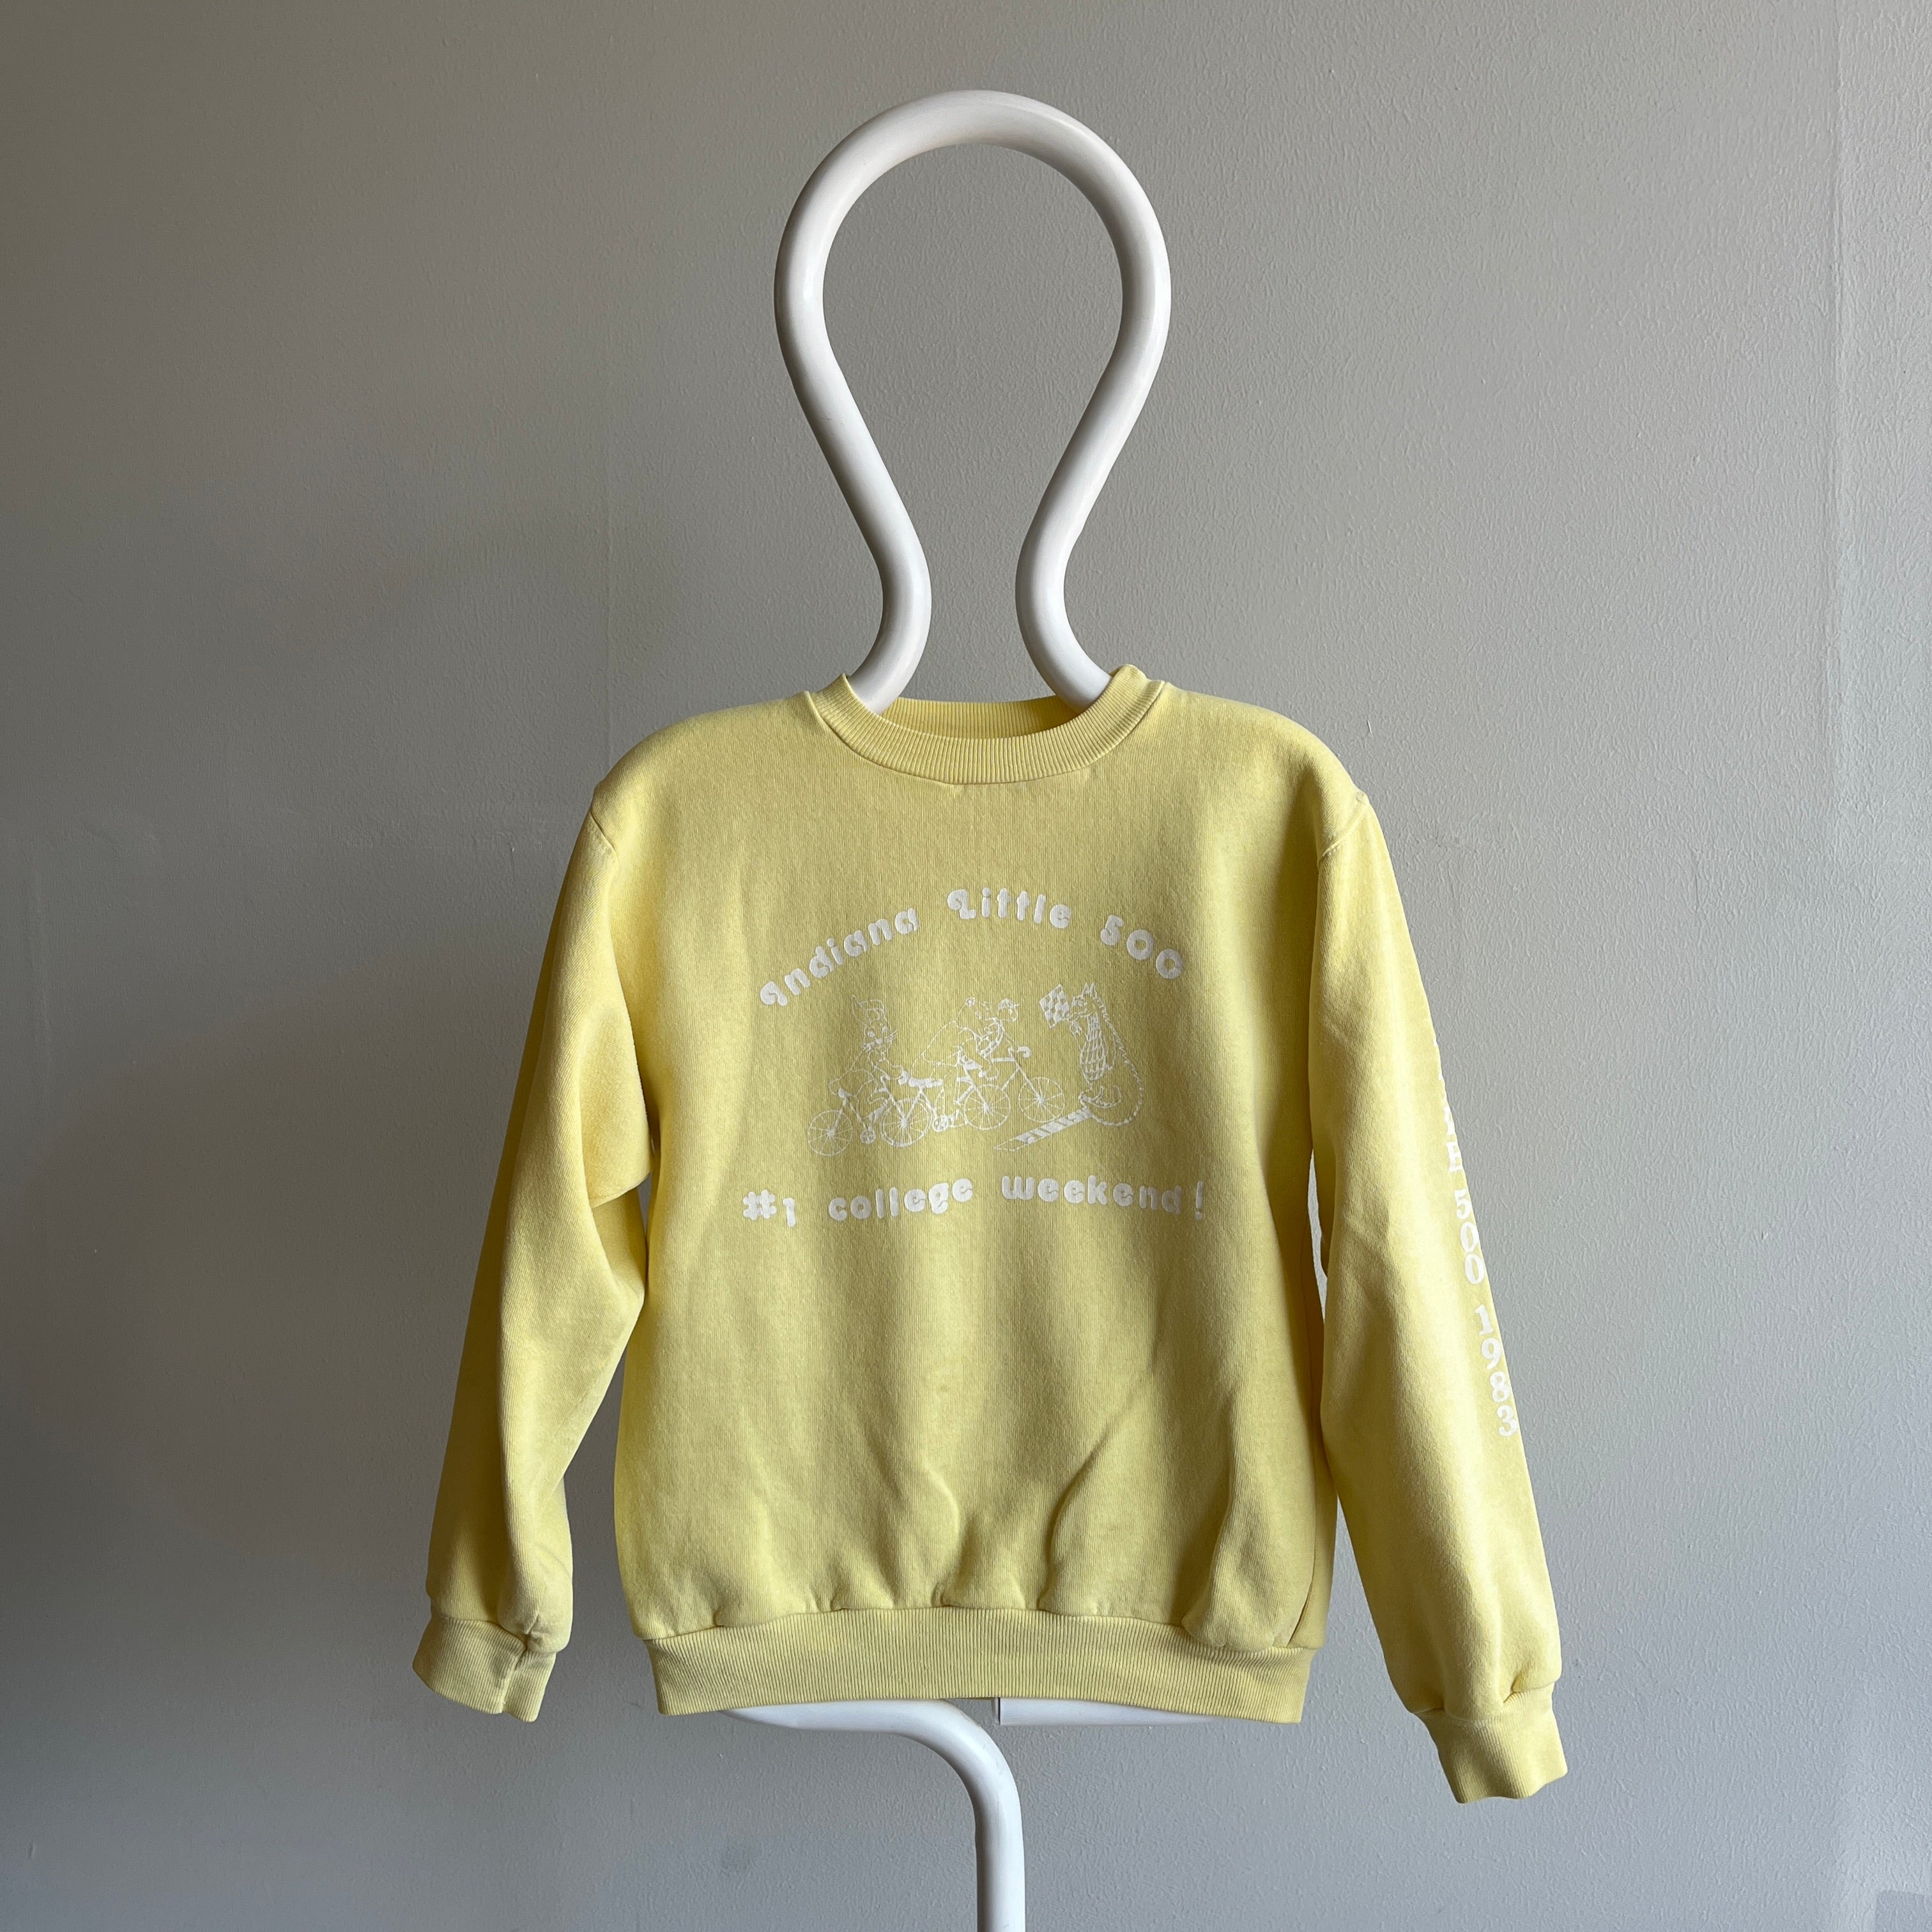 1970s Indiana Little 500 Sweatshirt by Russell Brand